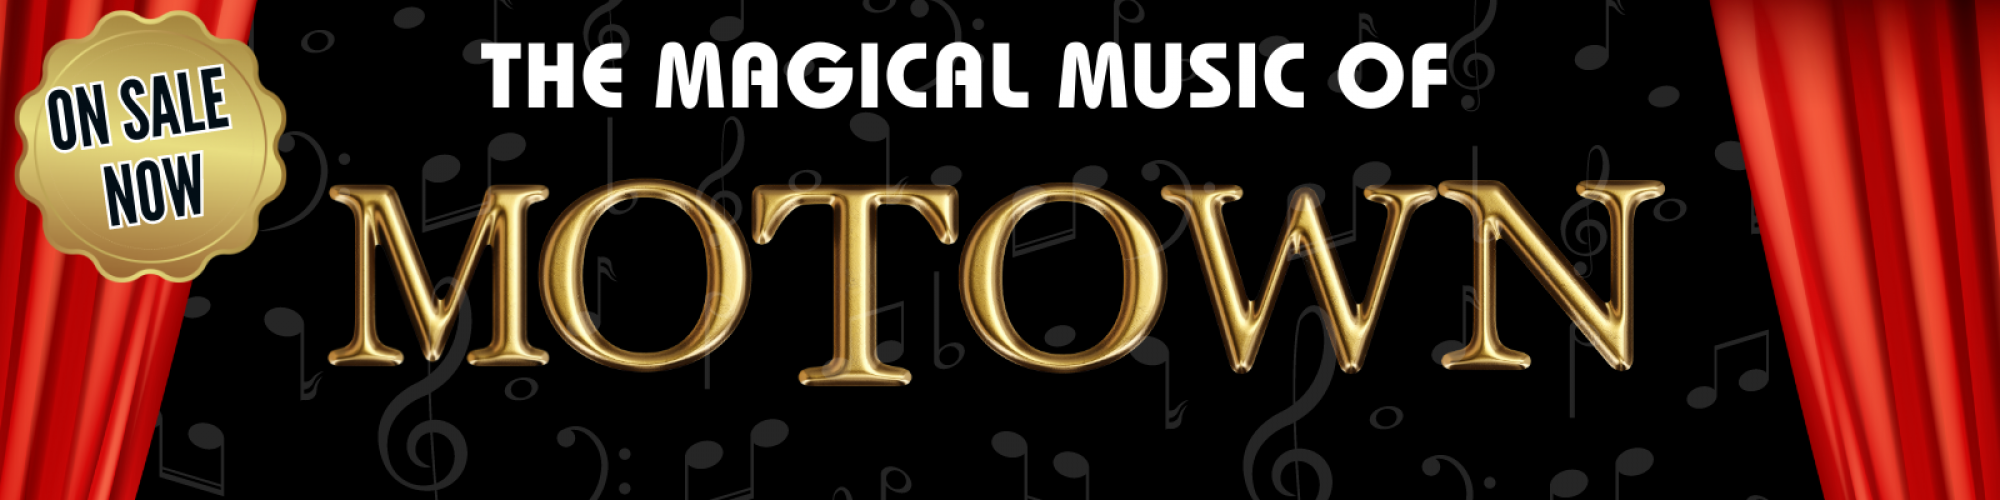 The MagicaL Music of Motown on sale now 